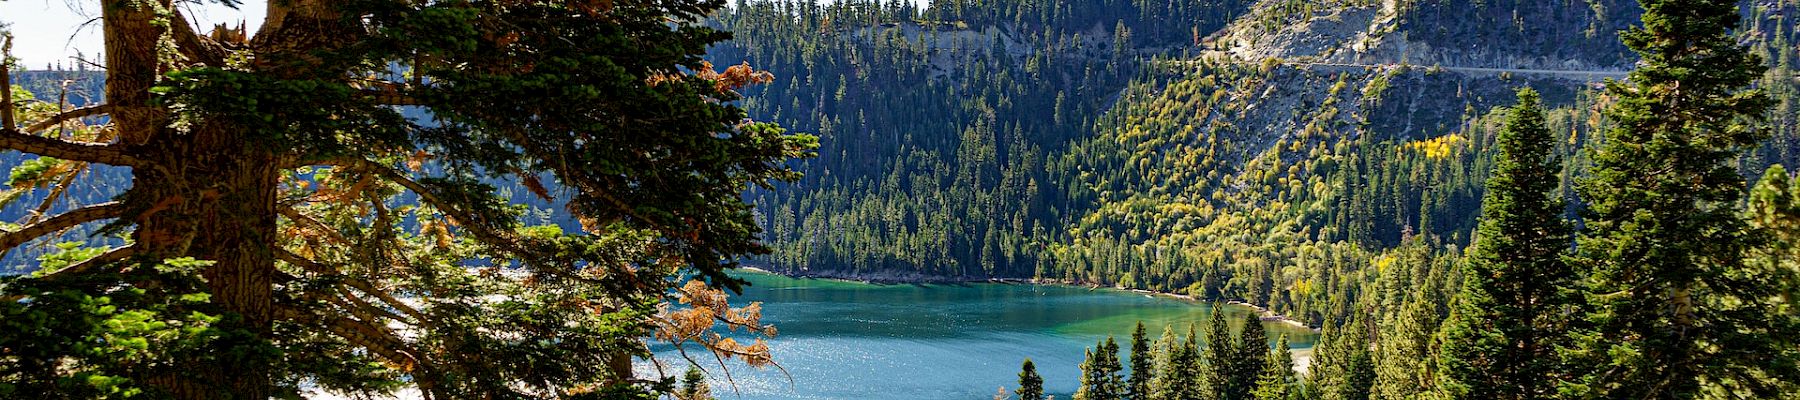 A serene lake is surrounded by dense forest and hilly terrain under a clear blue sky, offering a beautiful and tranquil natural landscape.